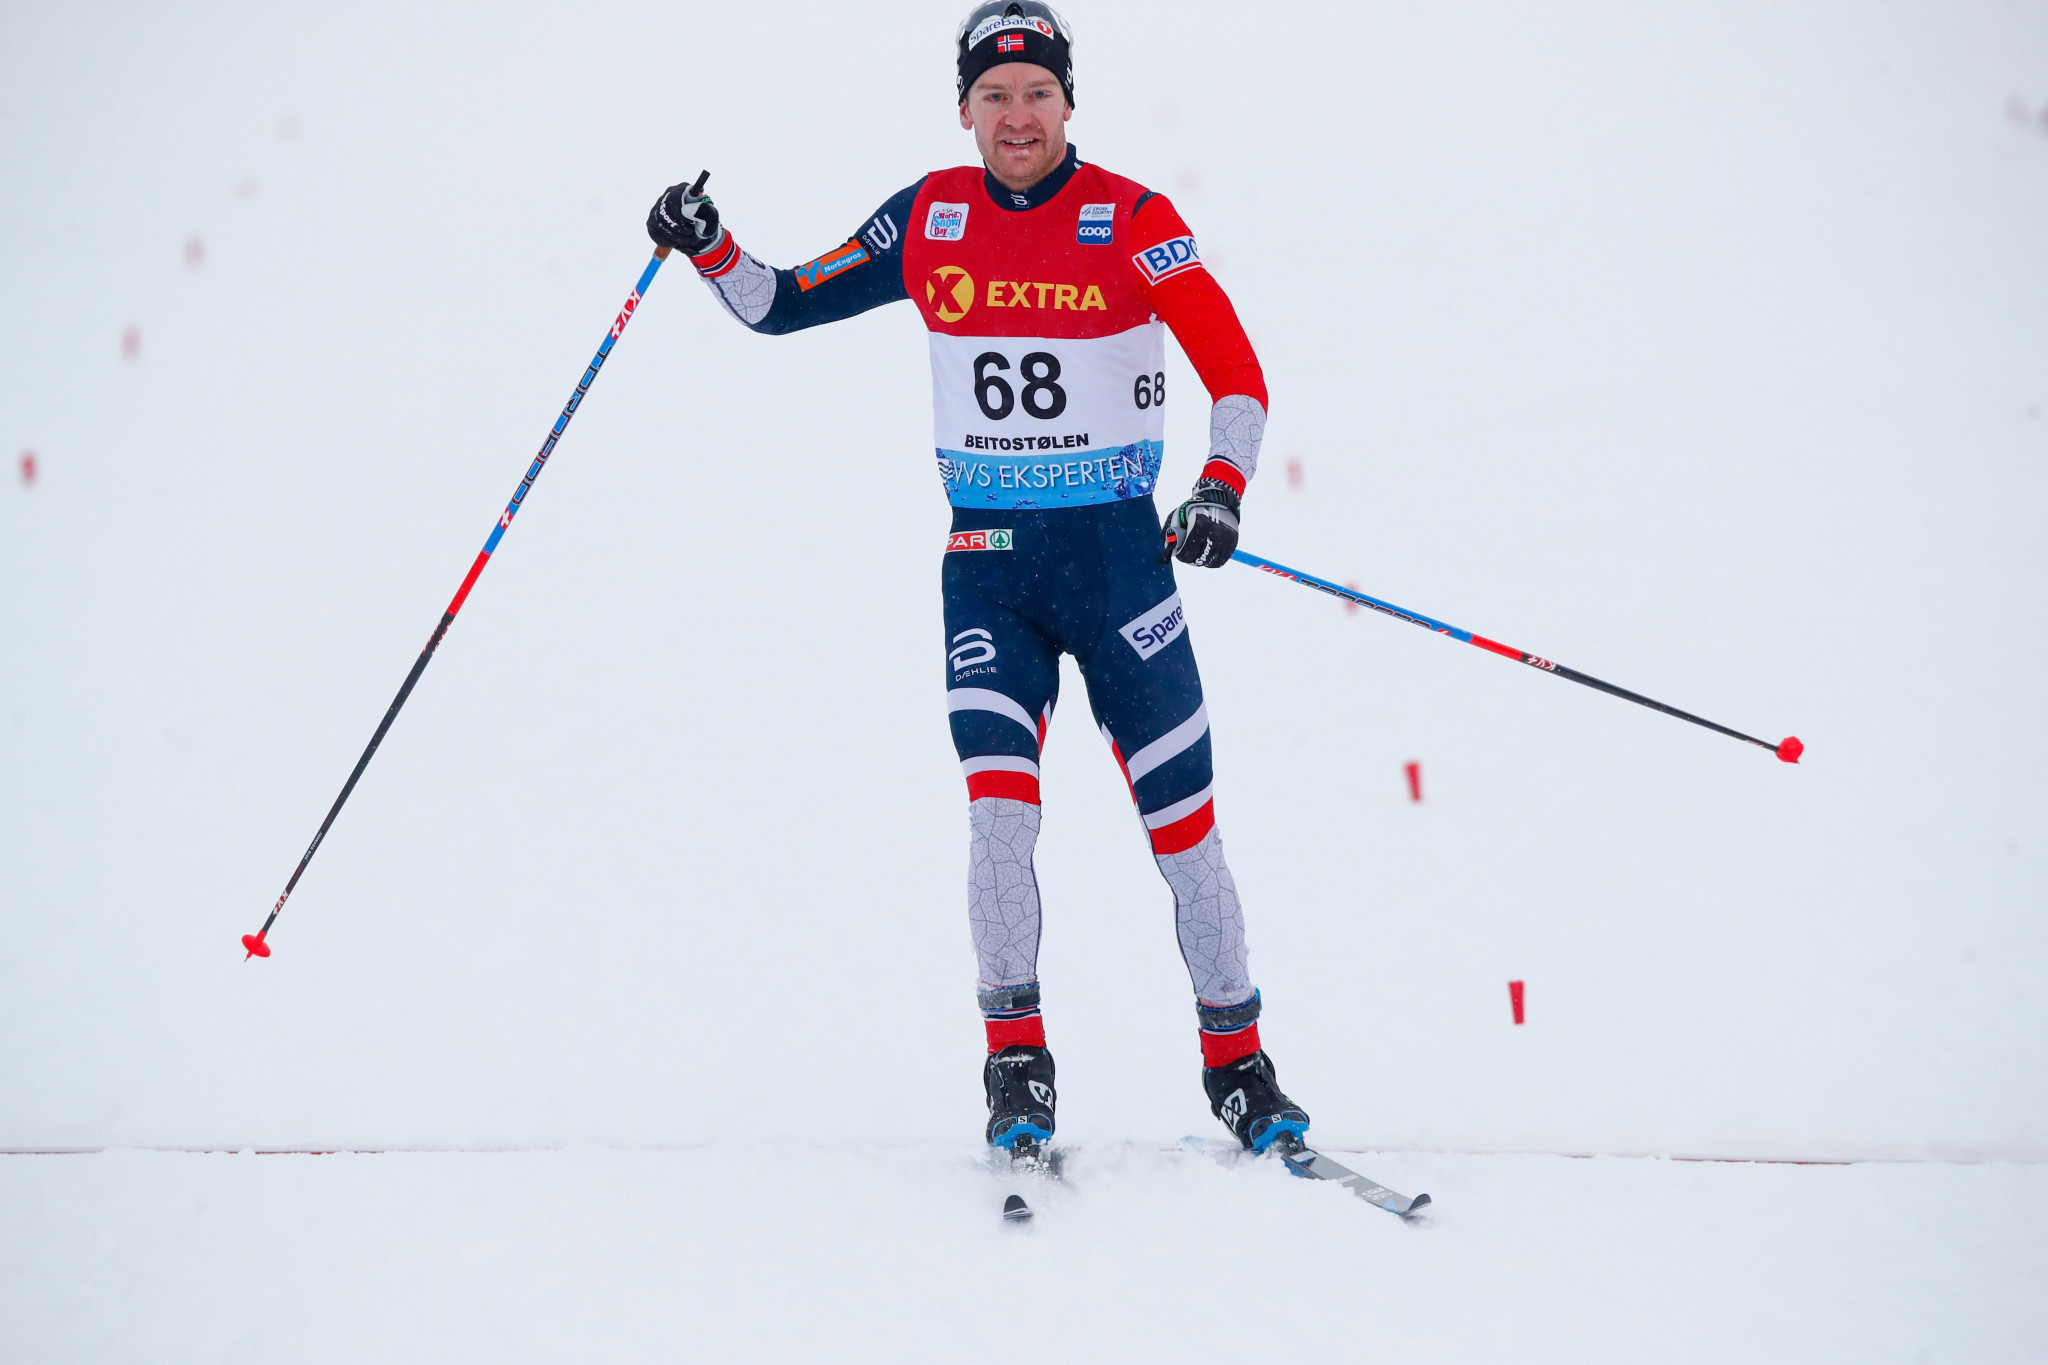 Røthe wins first FIS Cross-Country World Cup event in over a year